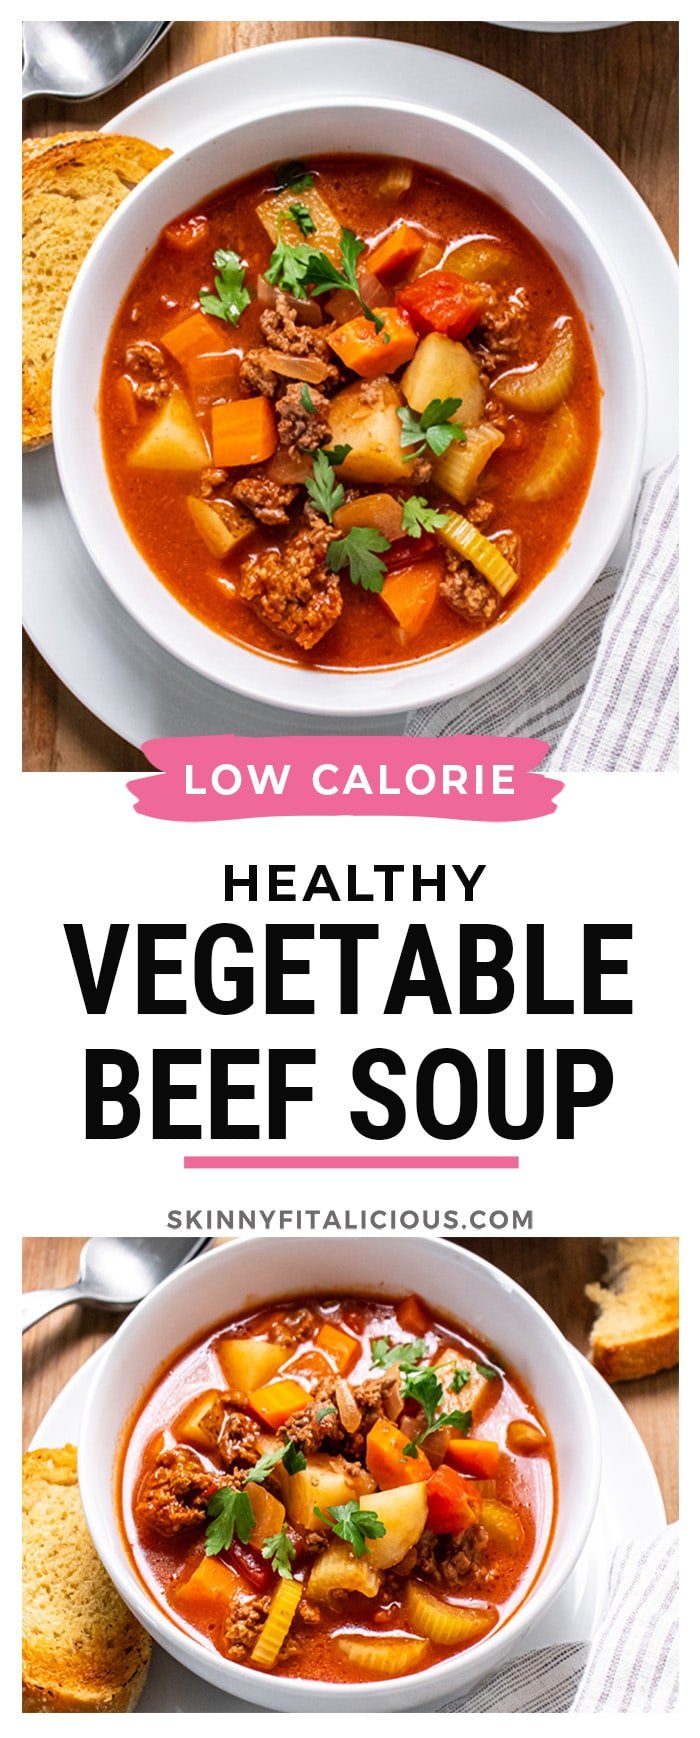 Healthy Beef Vegetable Soup is a simple low calorie homemade soup recipe packed with delicious flavor! Easy to make on the stovetop, slow cooker or Instant Pot for a hearty dinner.